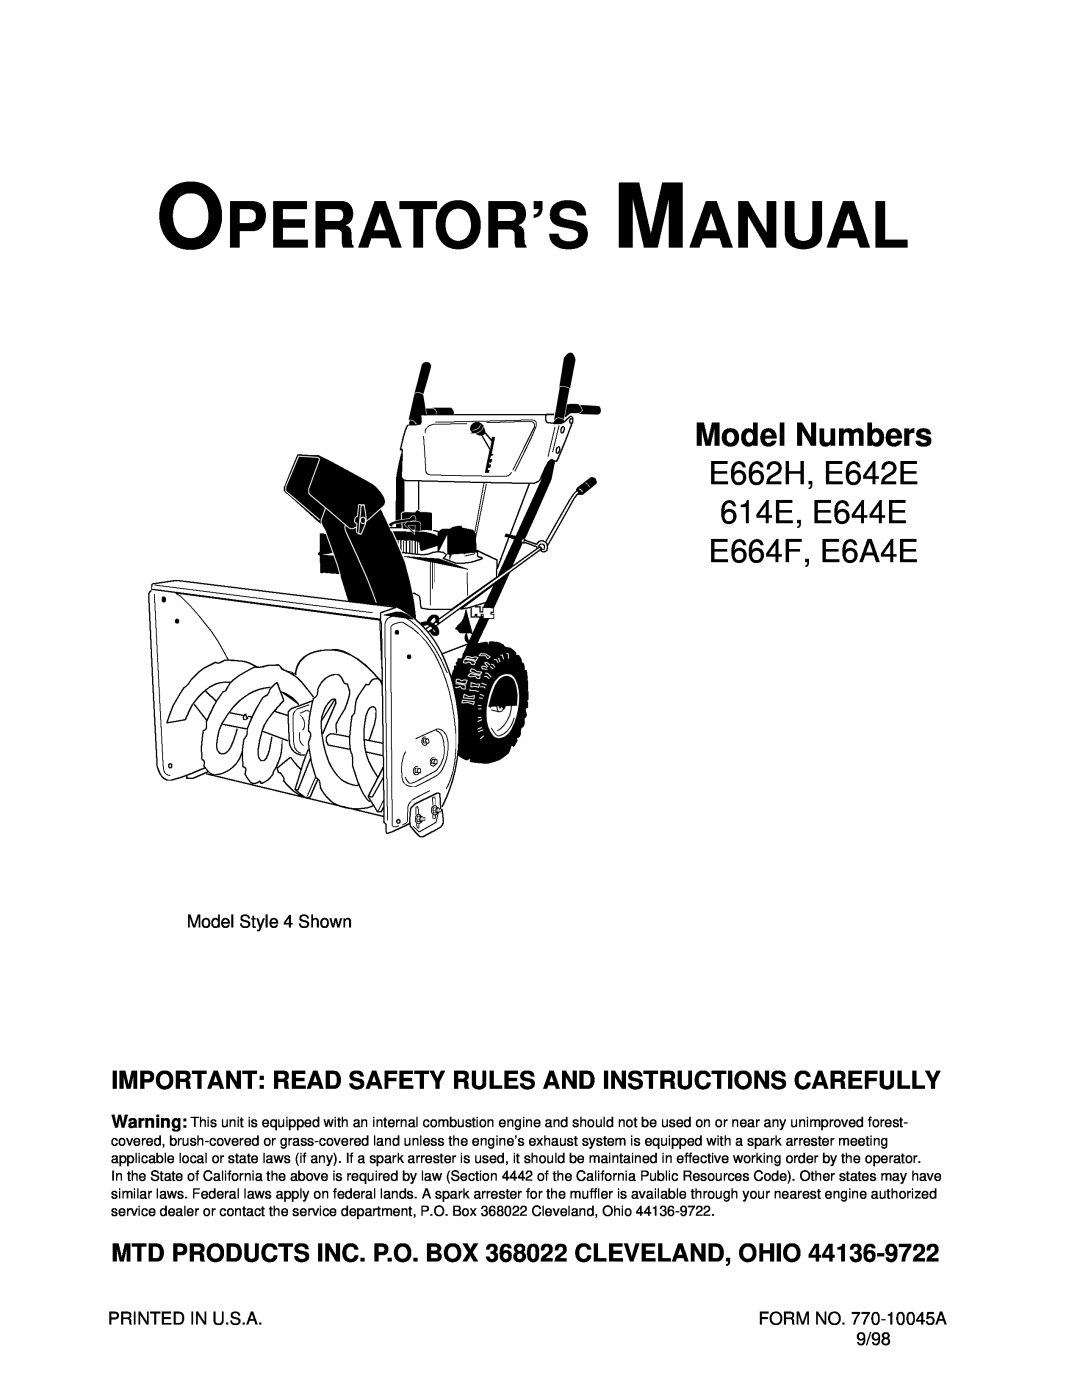 MTD E6A4E, E664F, E662H manual Model Numbers, Important Read Safety Rules And Instructions Carefully, Operator’S Manual 